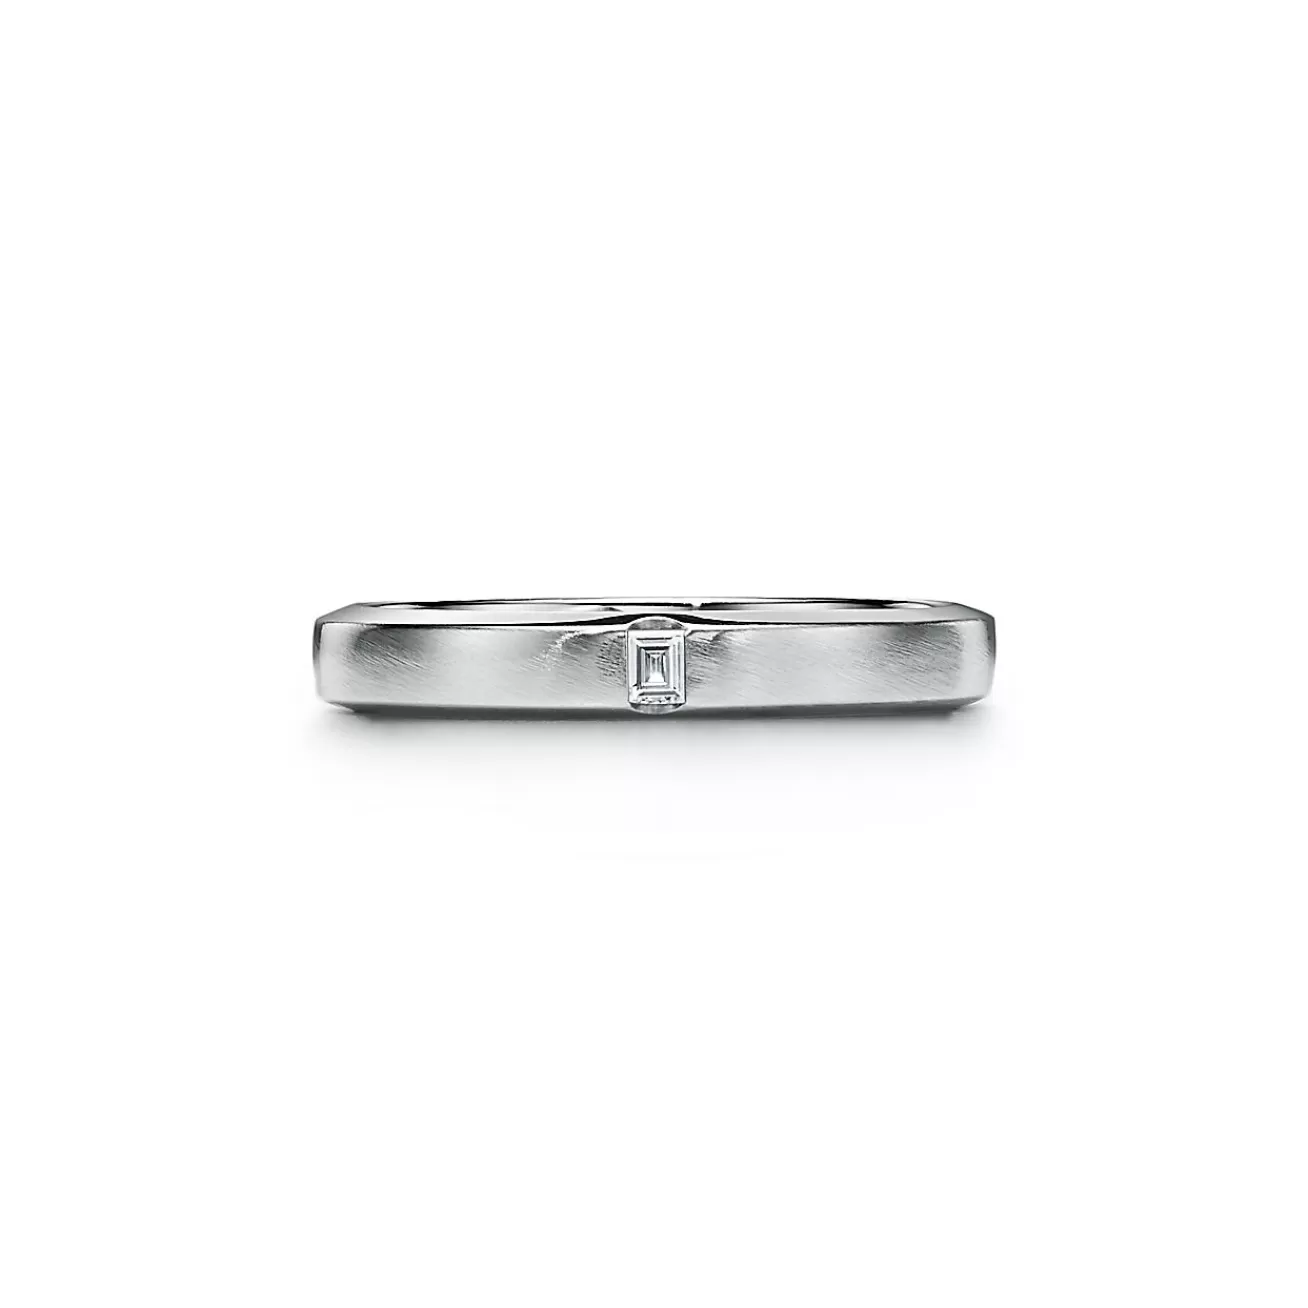 Tiffany & Co. The Charles Tiffany Setting Satin Finish Ring in Platinum with a Diamond, 3 mm | ^Women Rings | Men's Jewelry